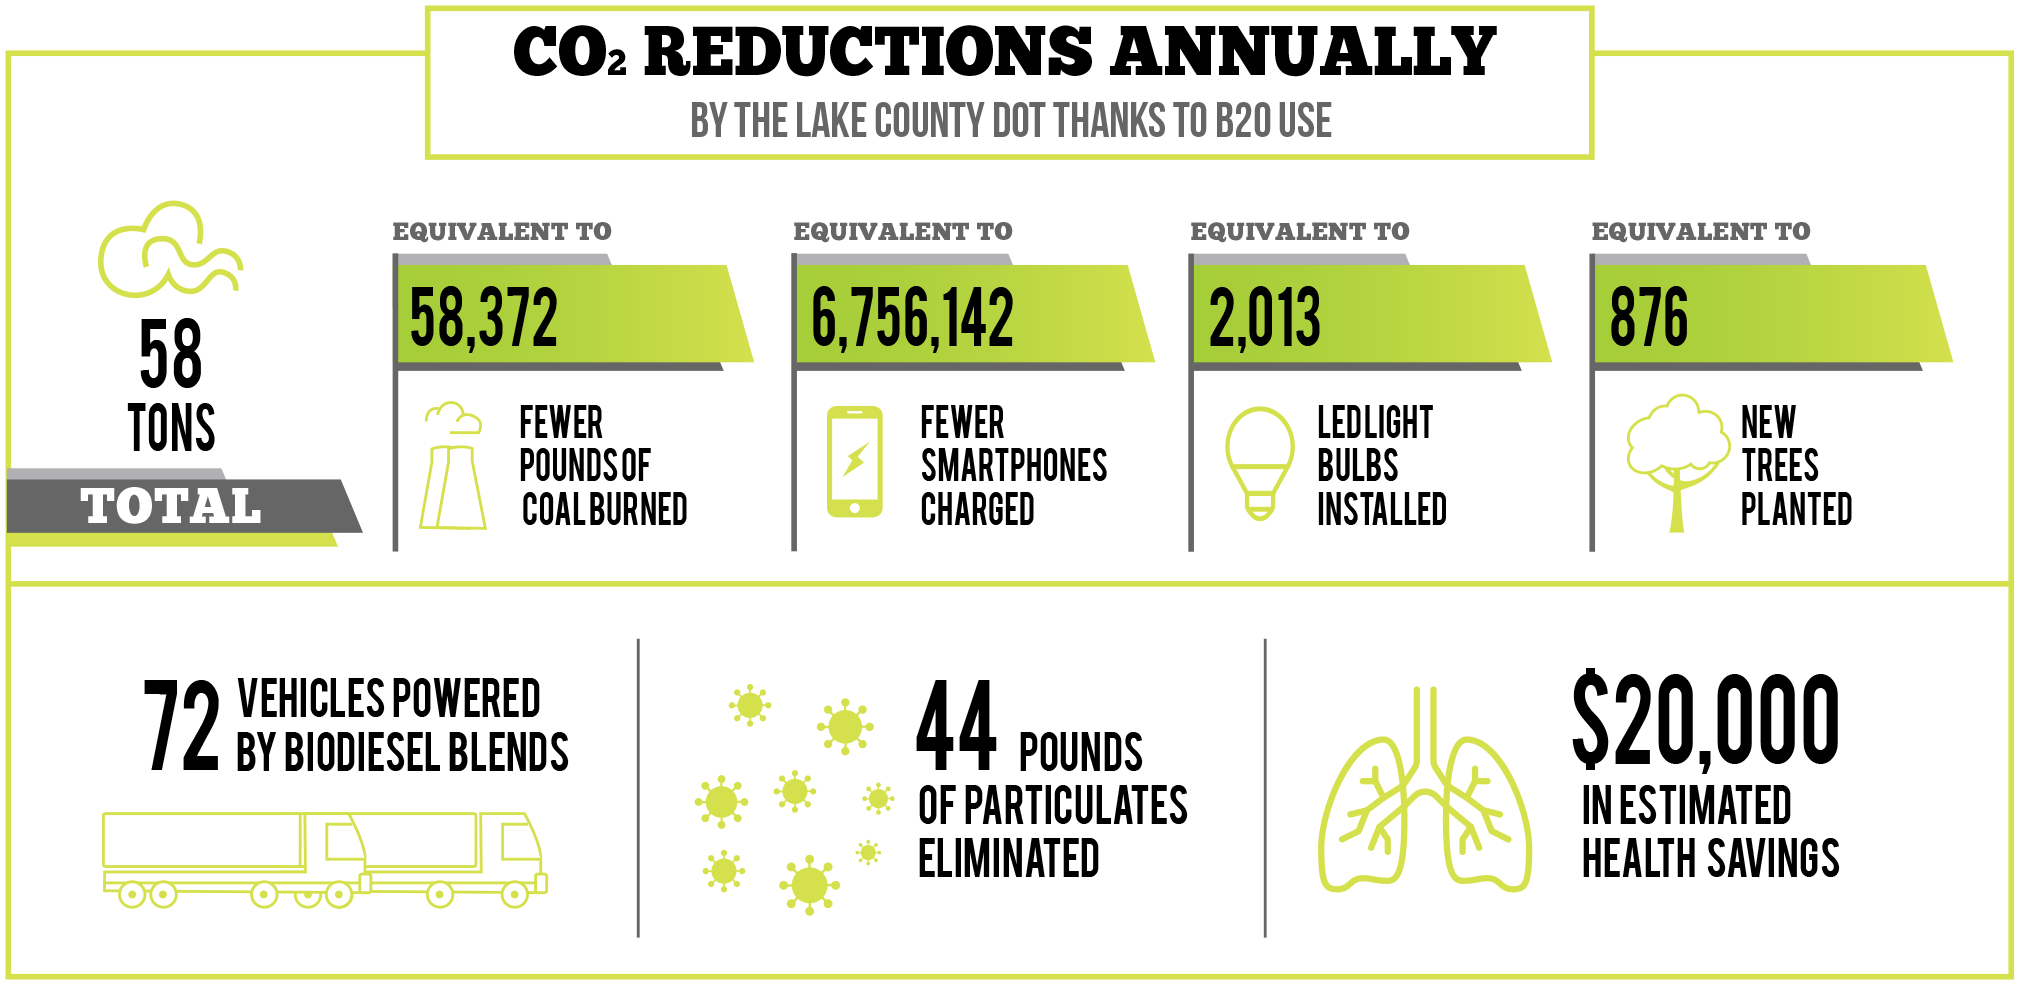 CO2 reductions annually by the lake county DOT thanks to B20 use infographic